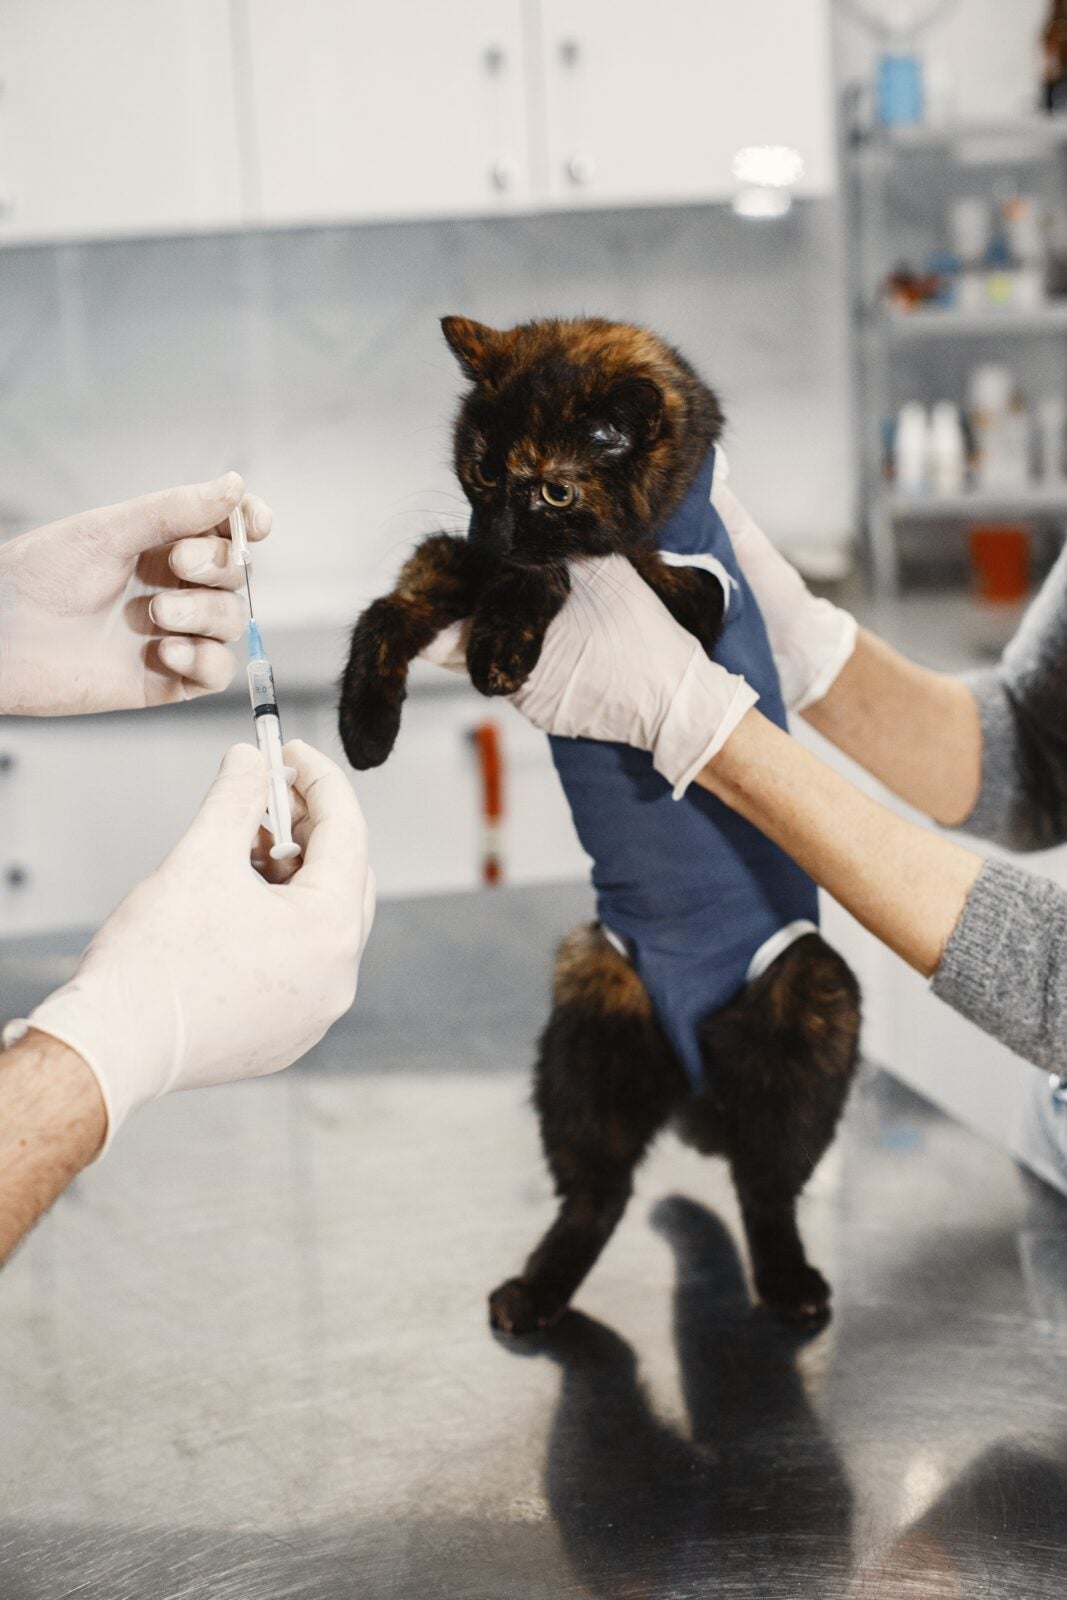 A cat at the vet, getting an injection shot.